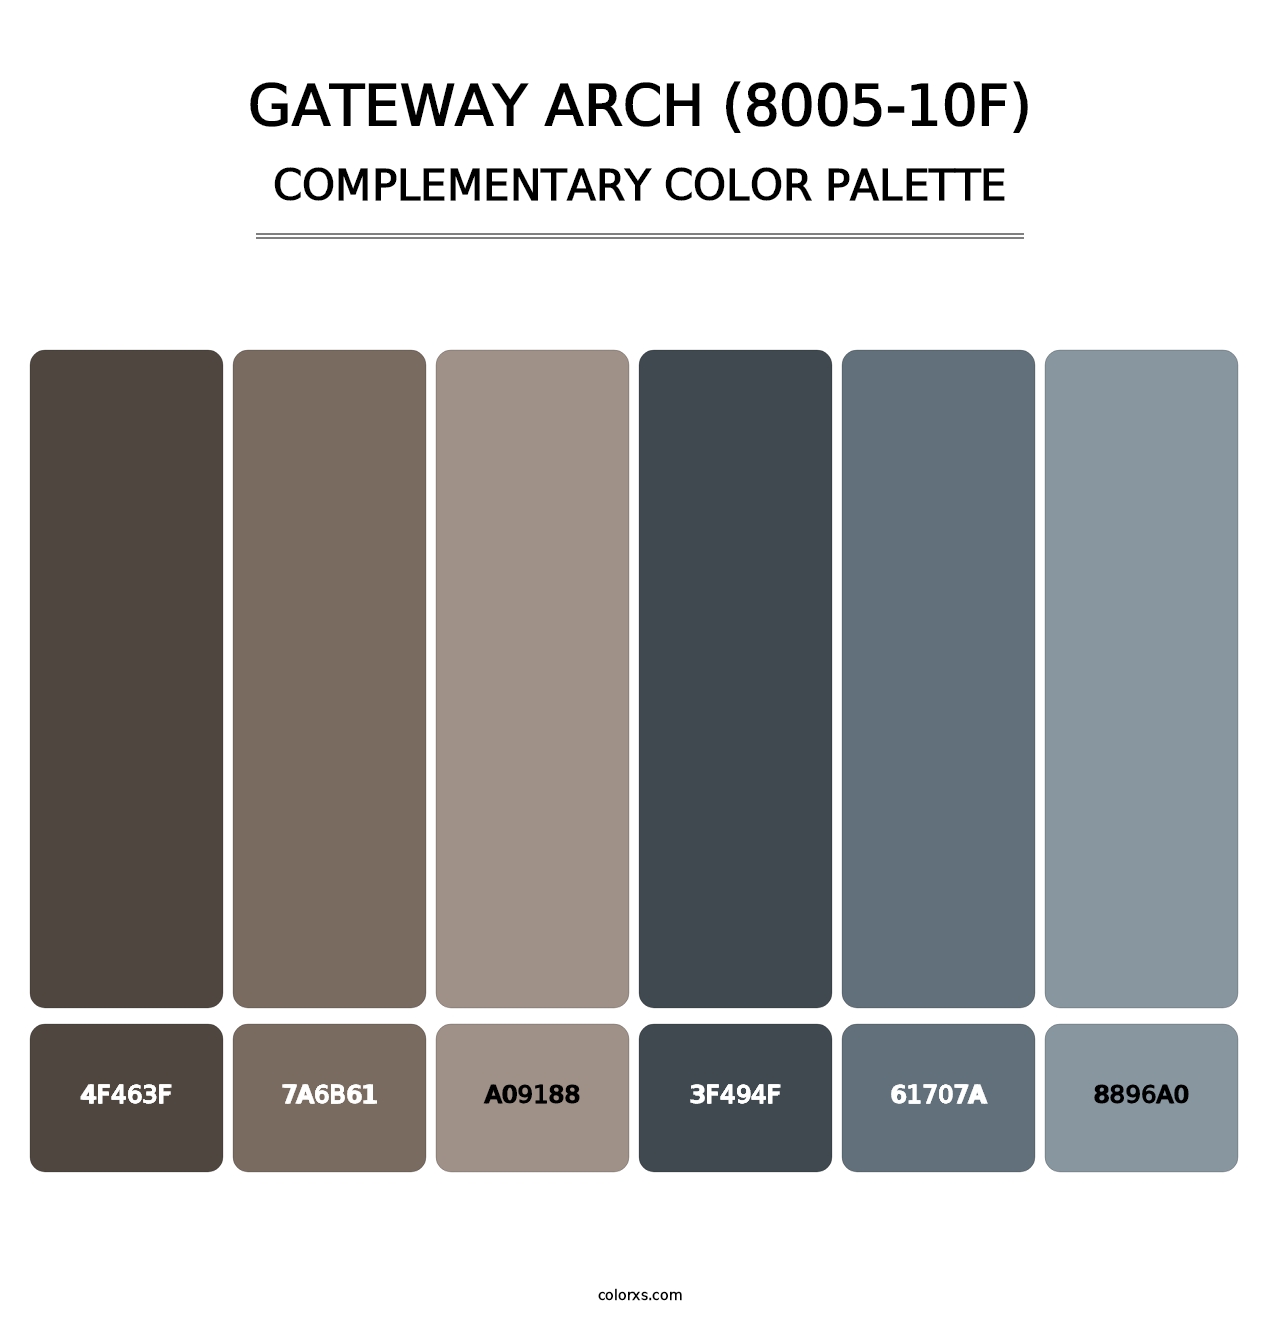 Gateway Arch (8005-10F) - Complementary Color Palette